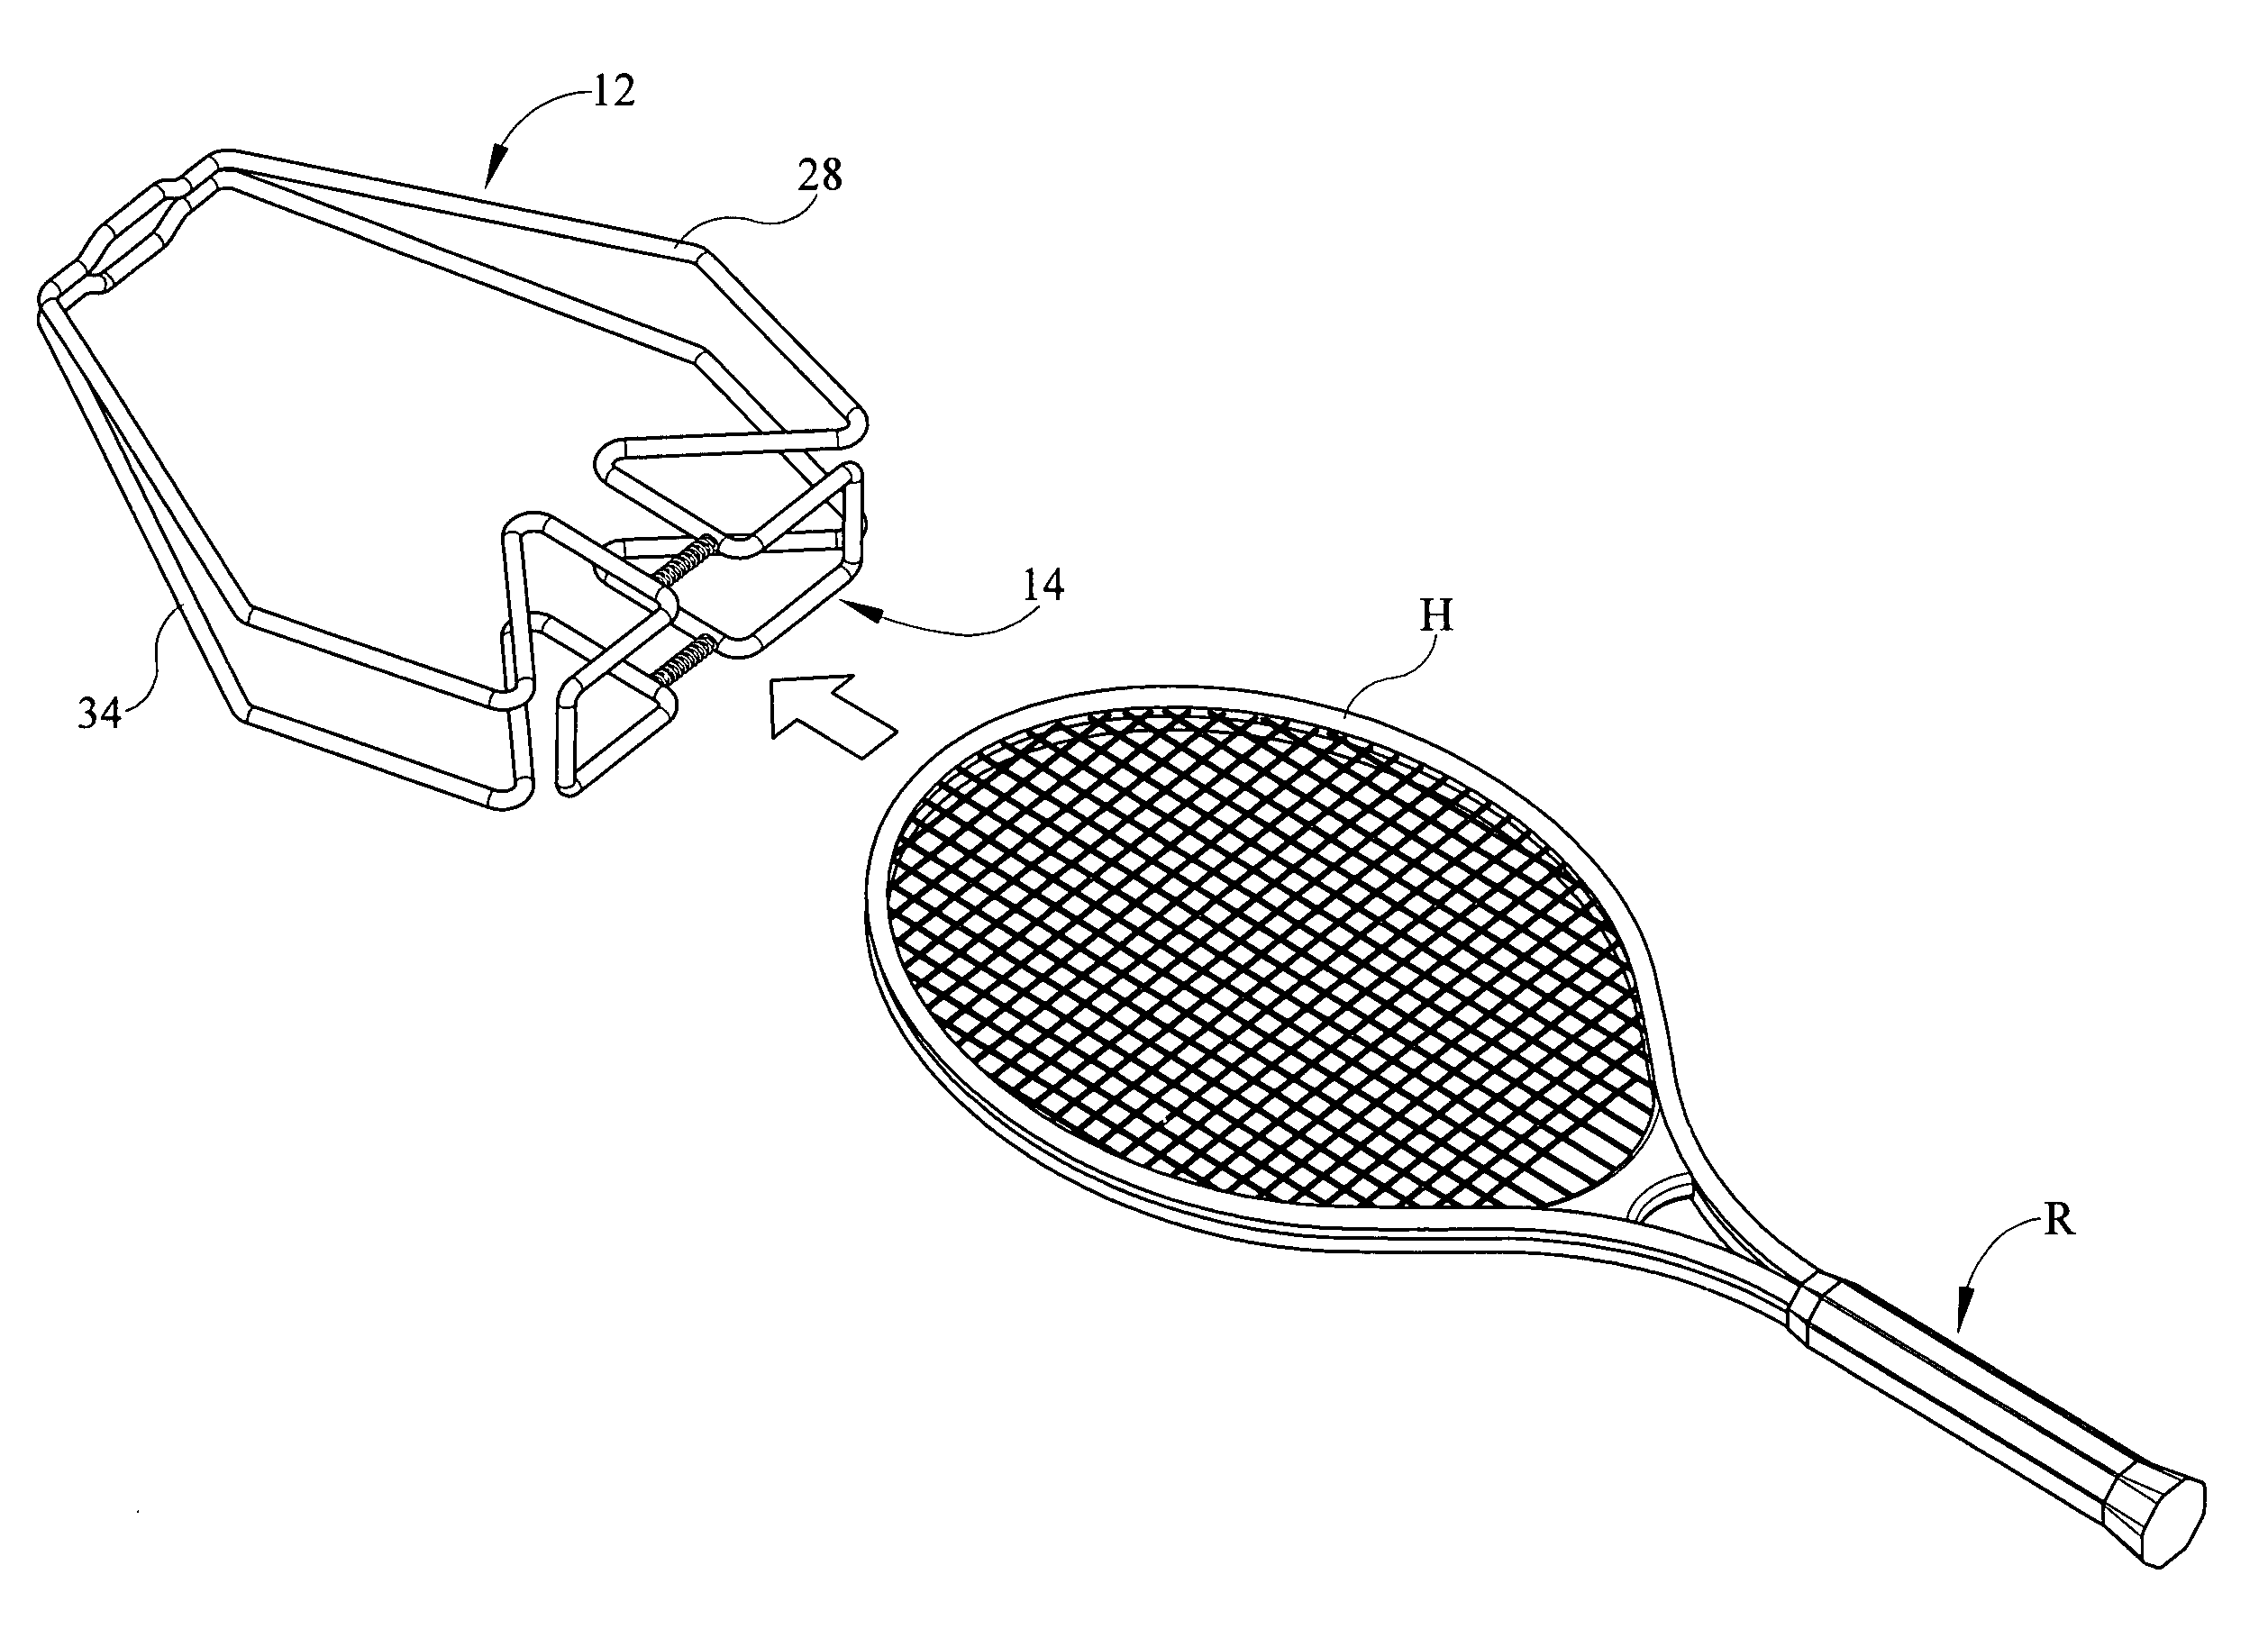 Weight attachable to a racquet